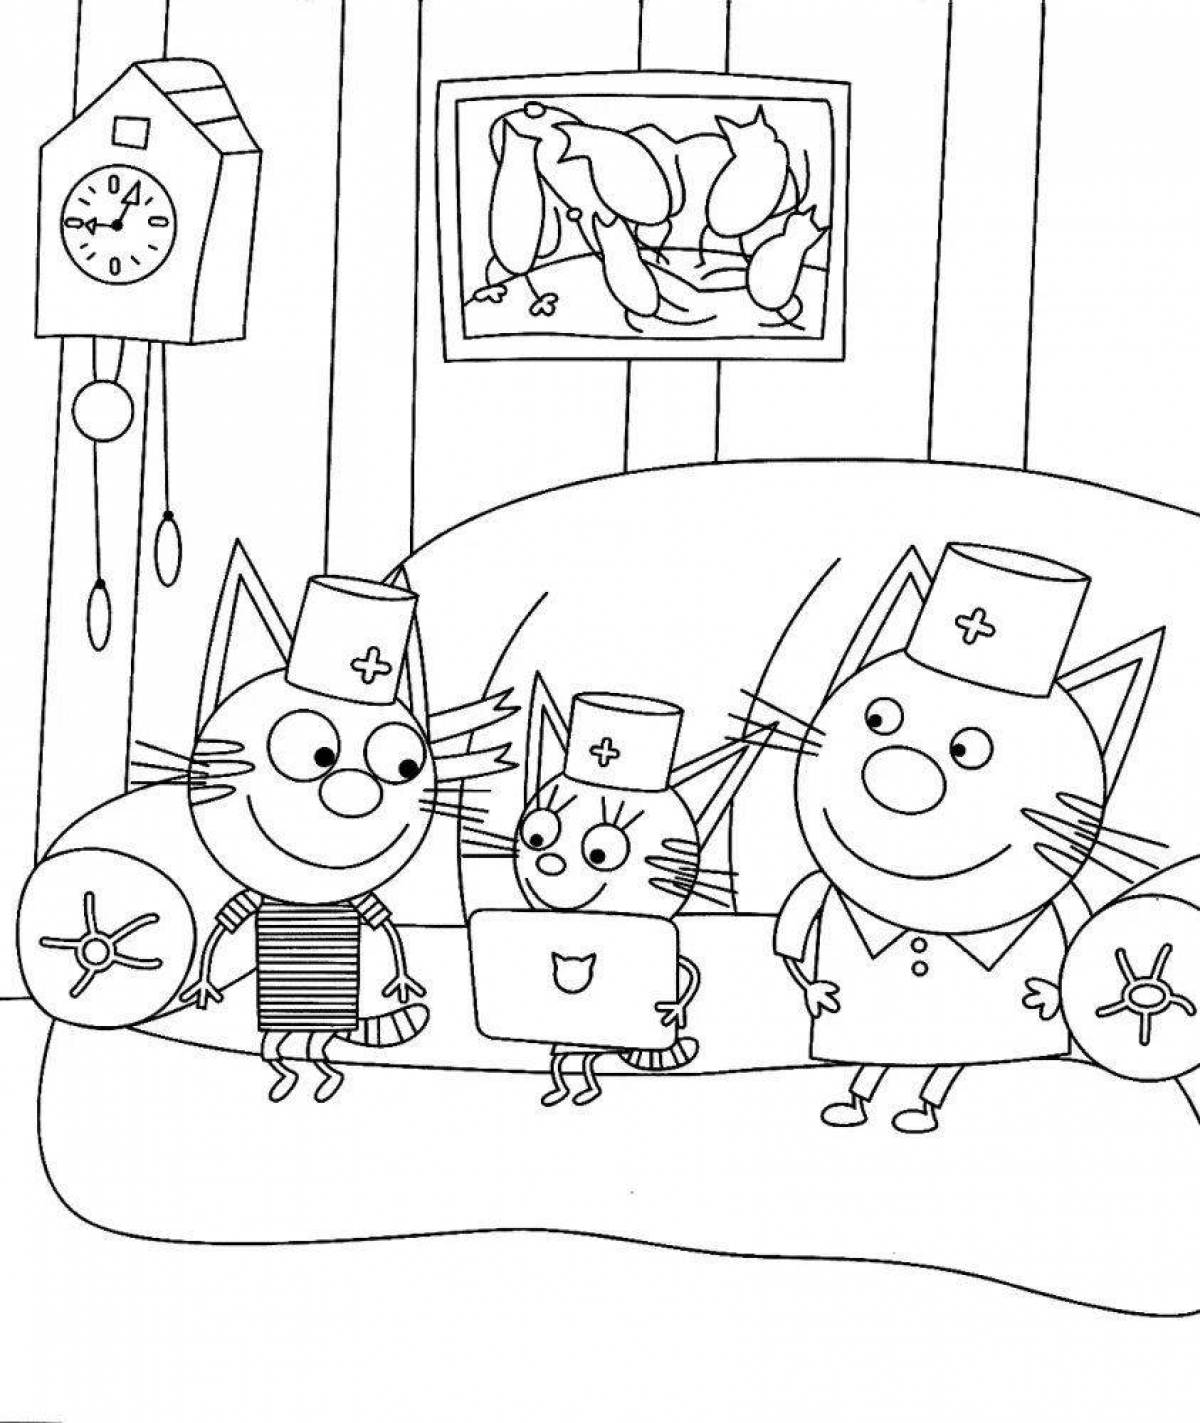 Three cats coloring pages for boys